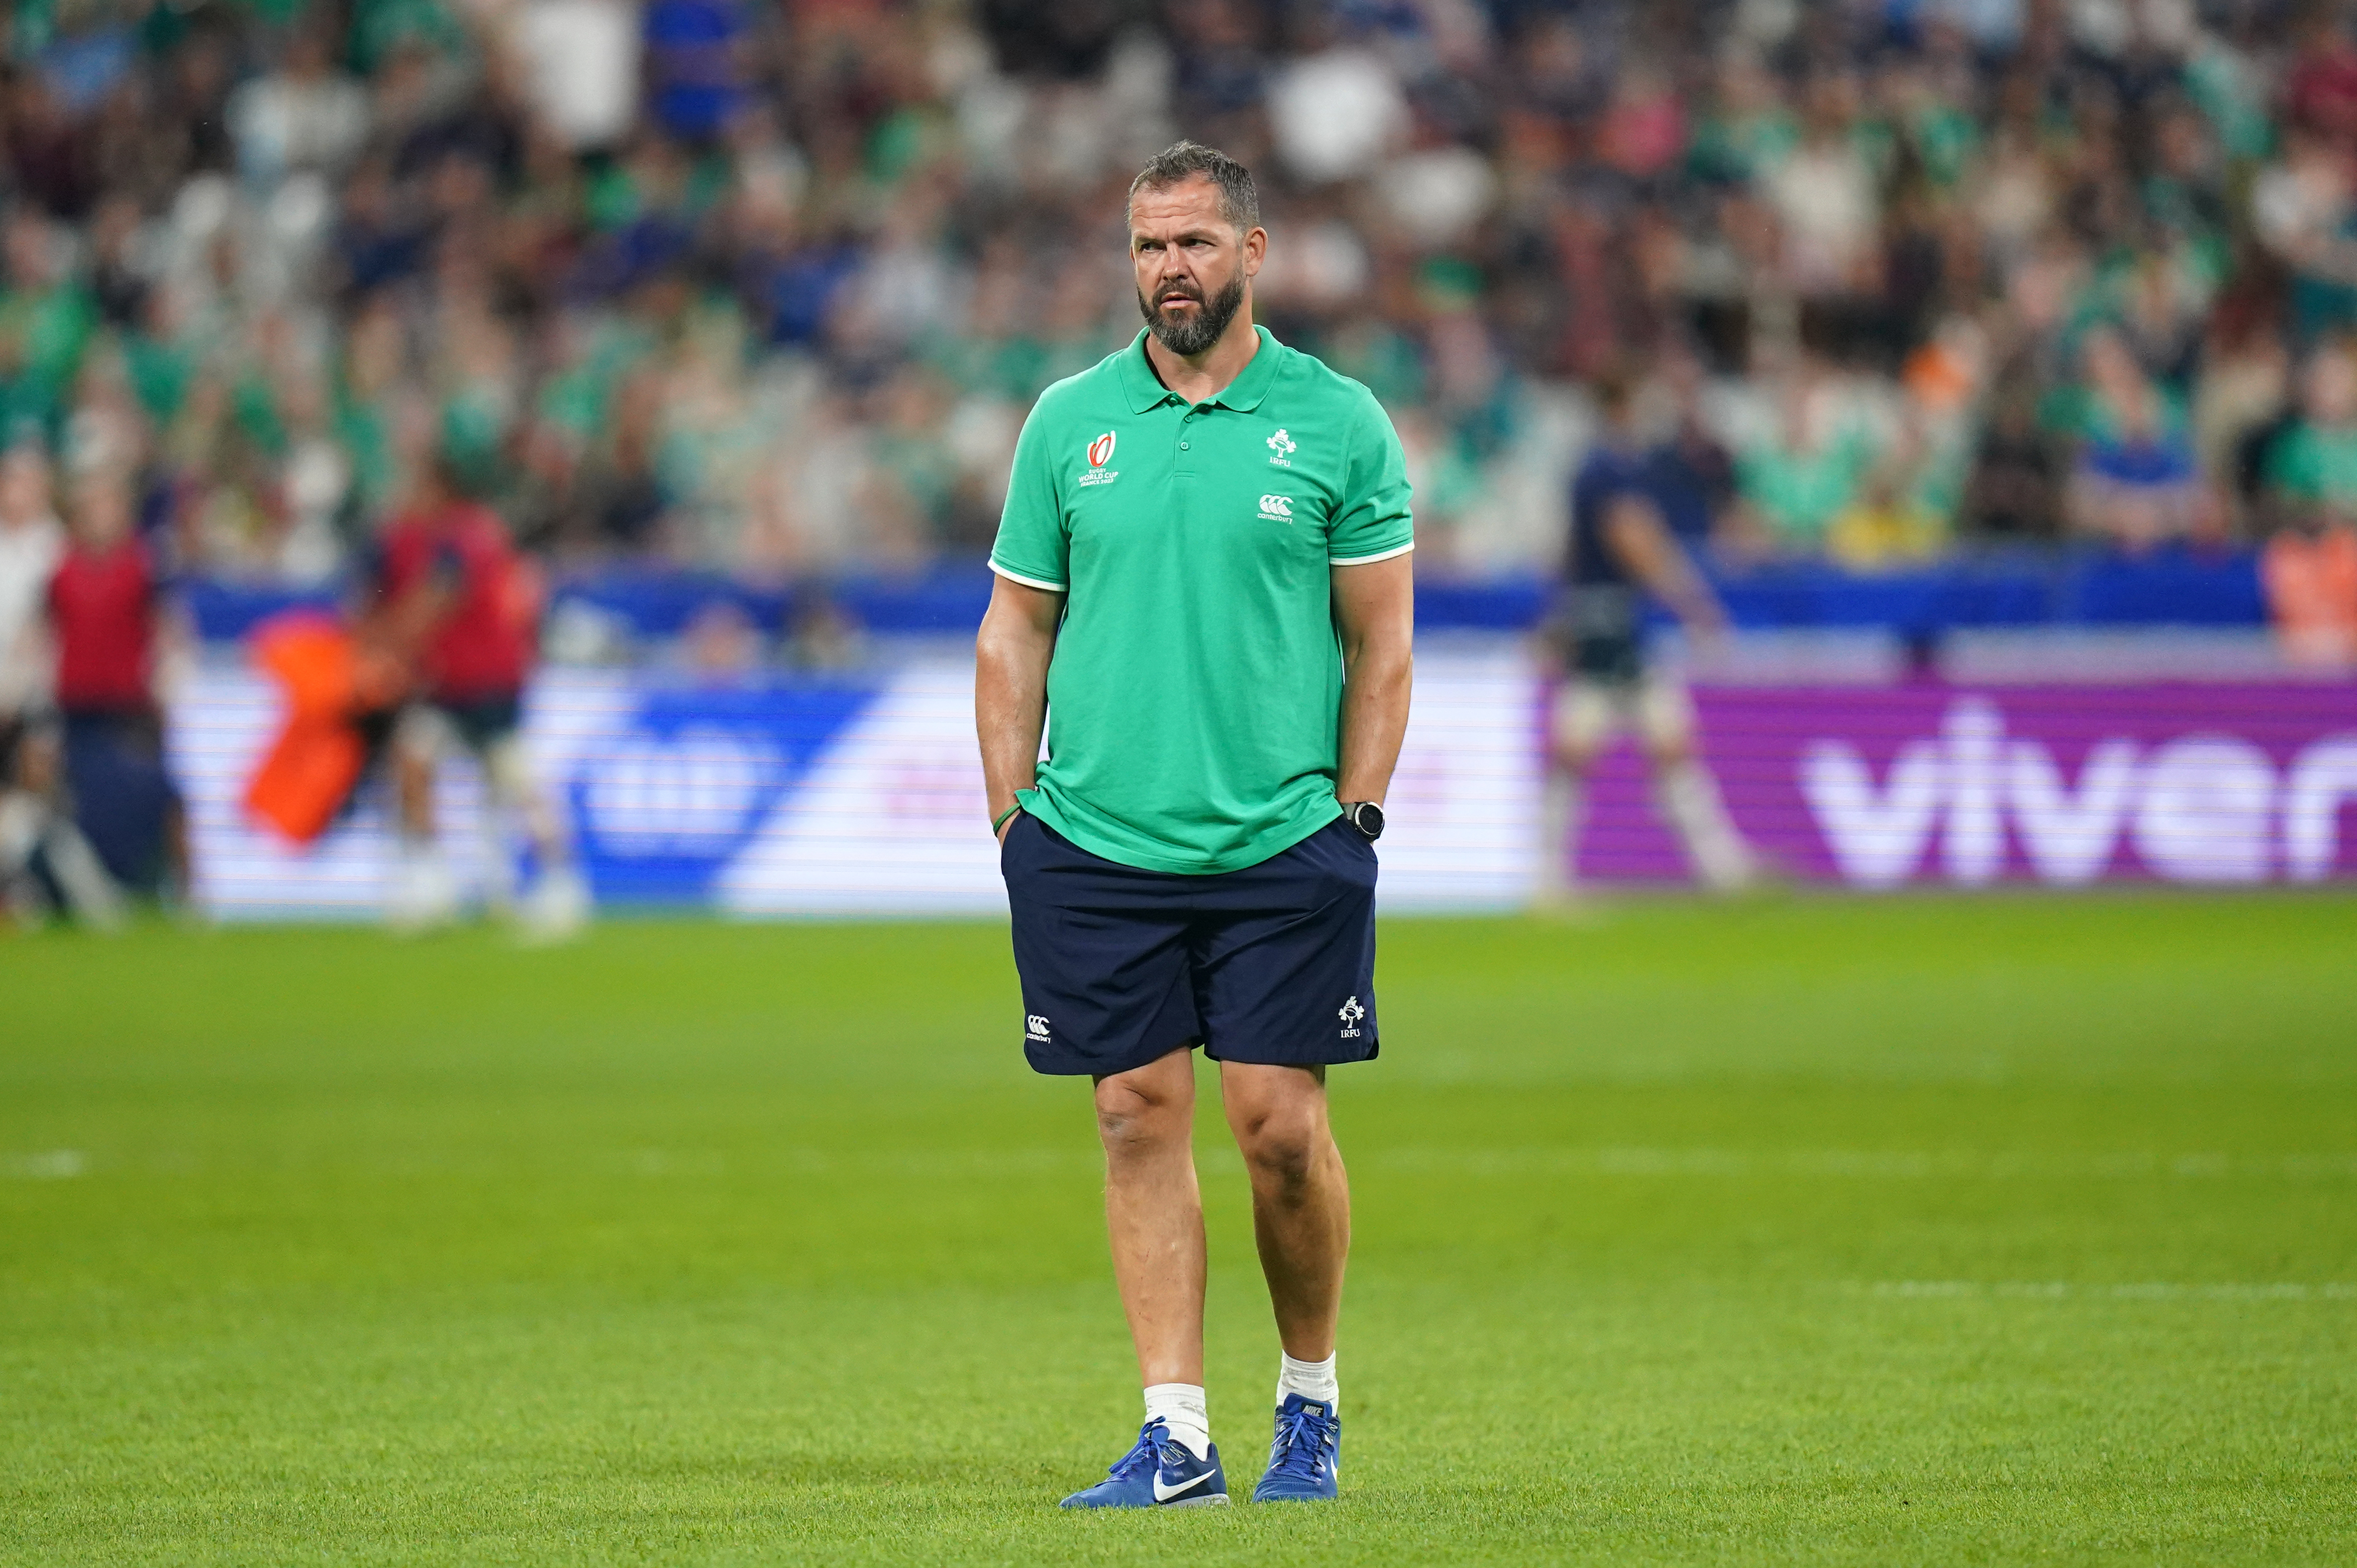 Head coach Andy Farrell feels there is more to come from in-form Ireland